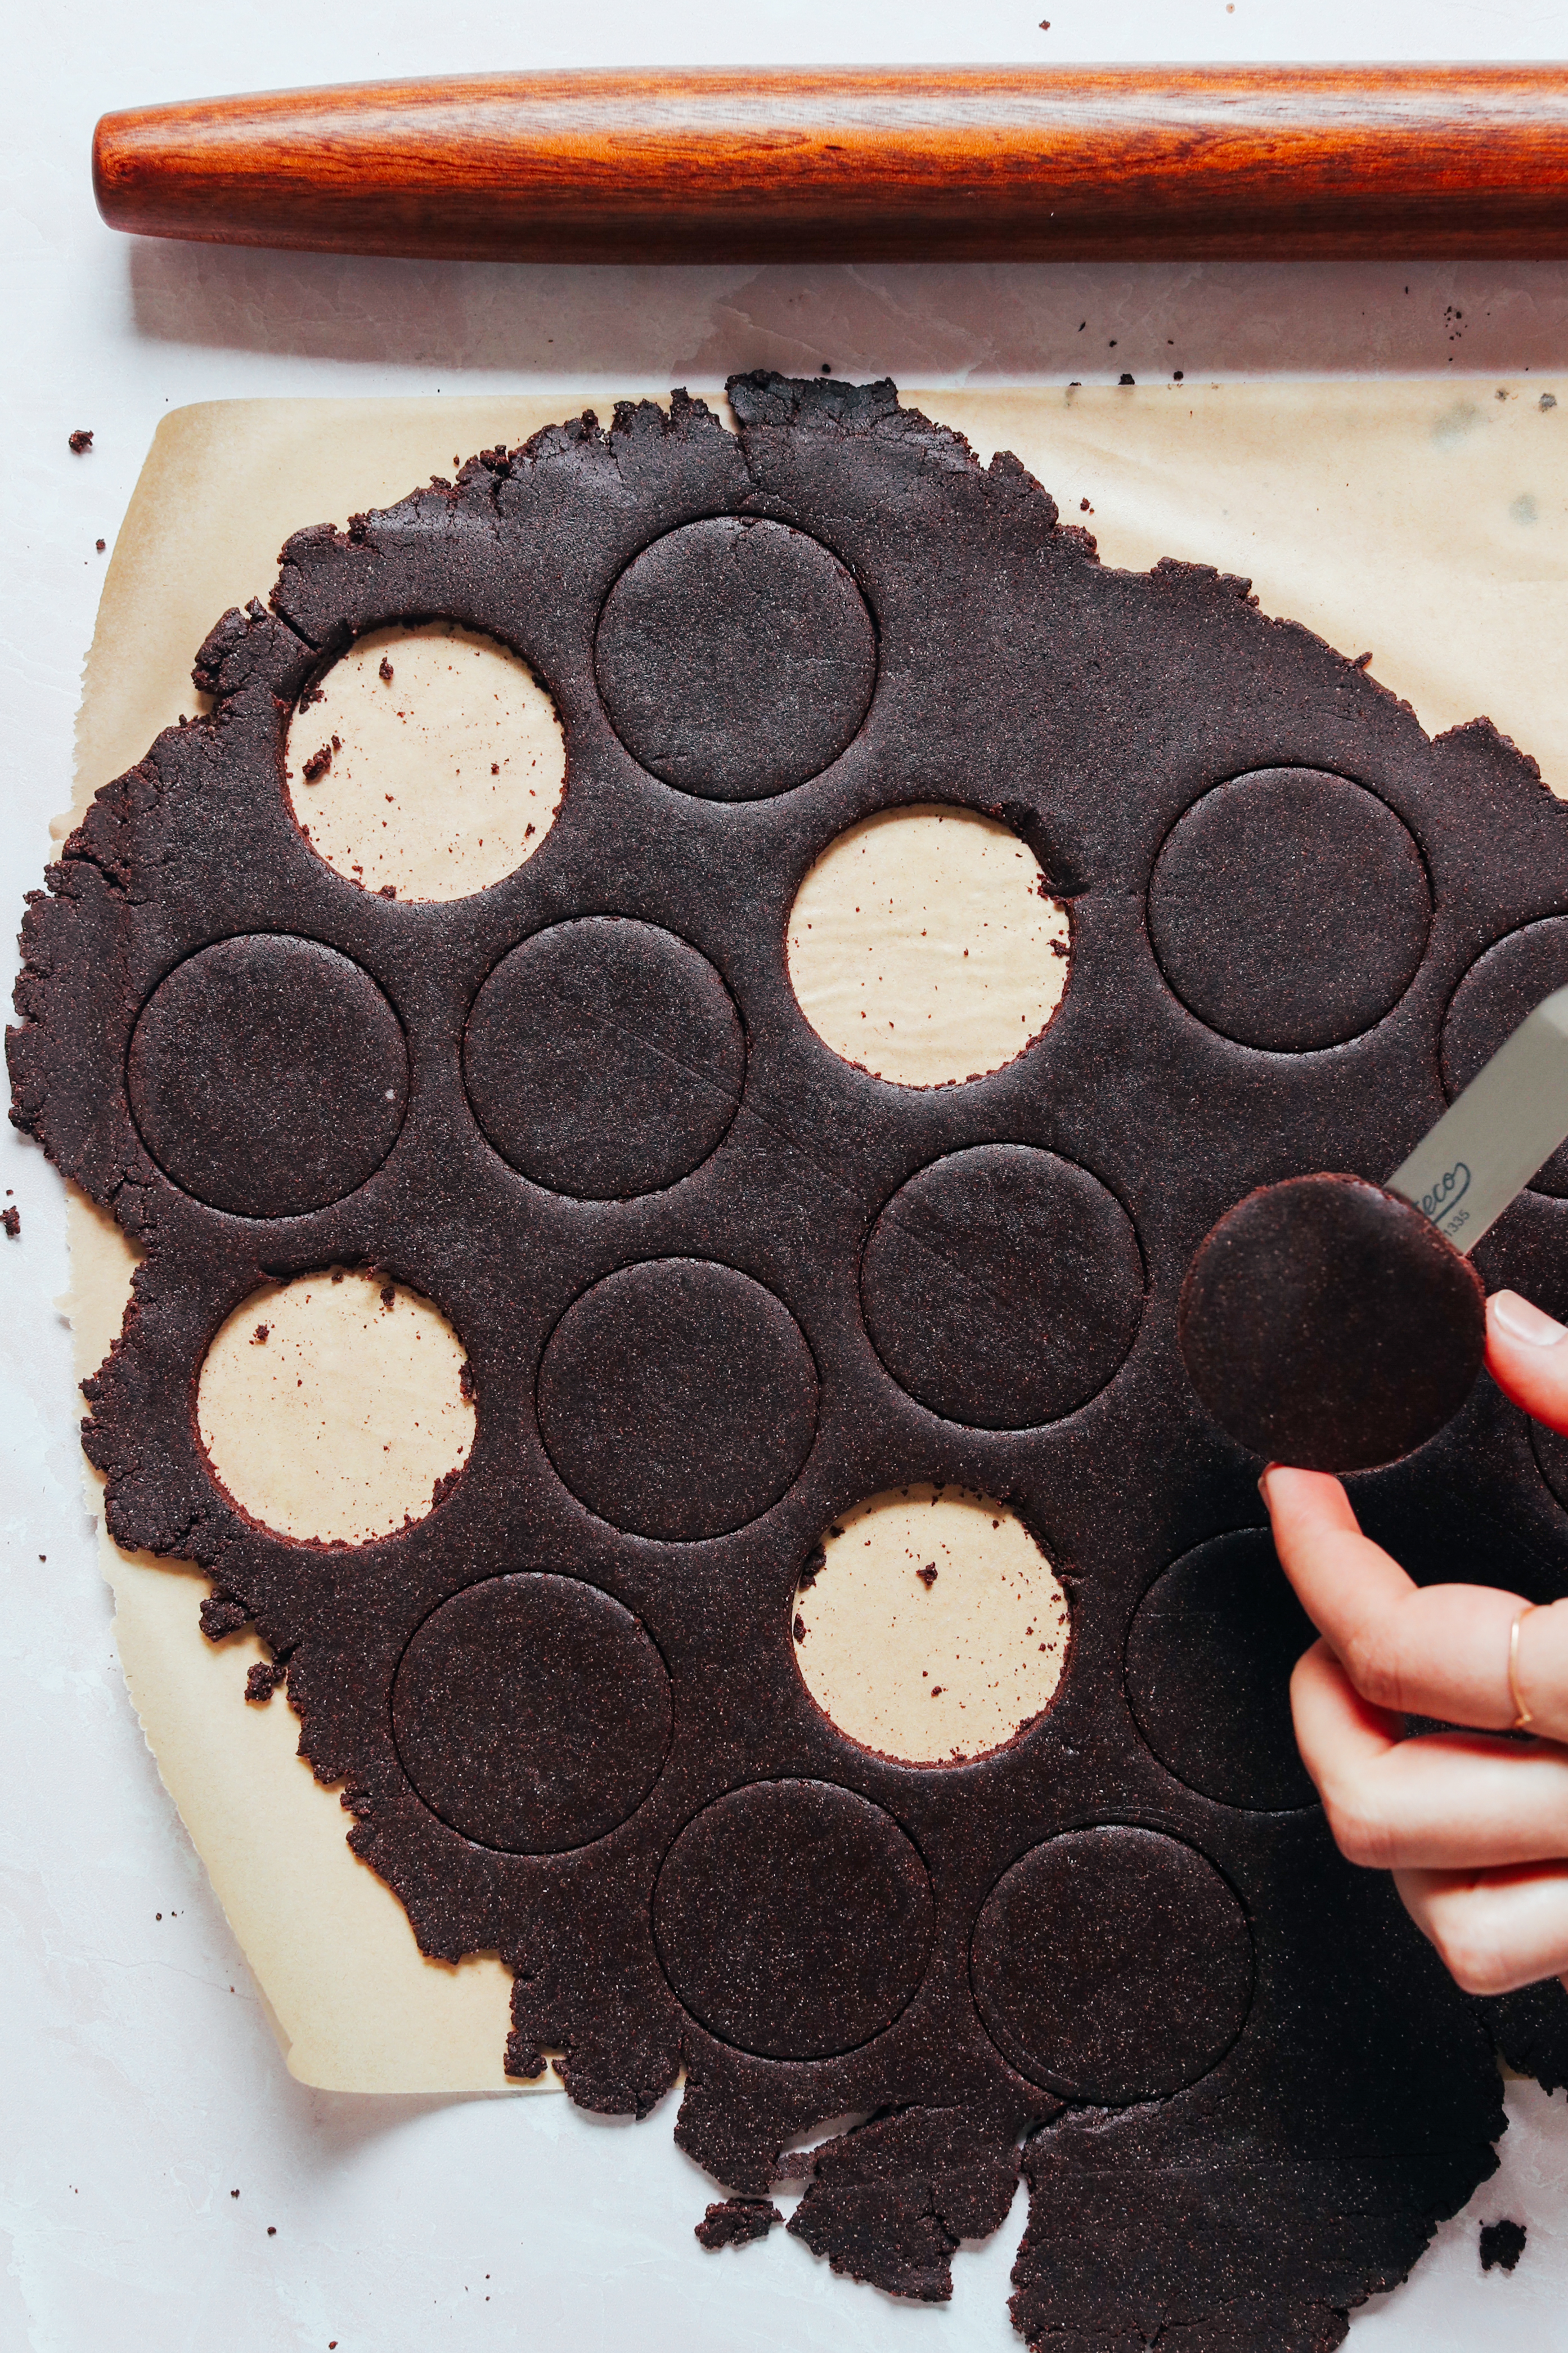 Cut the rolled-out chocolate cookie dough with a round cookie cutter